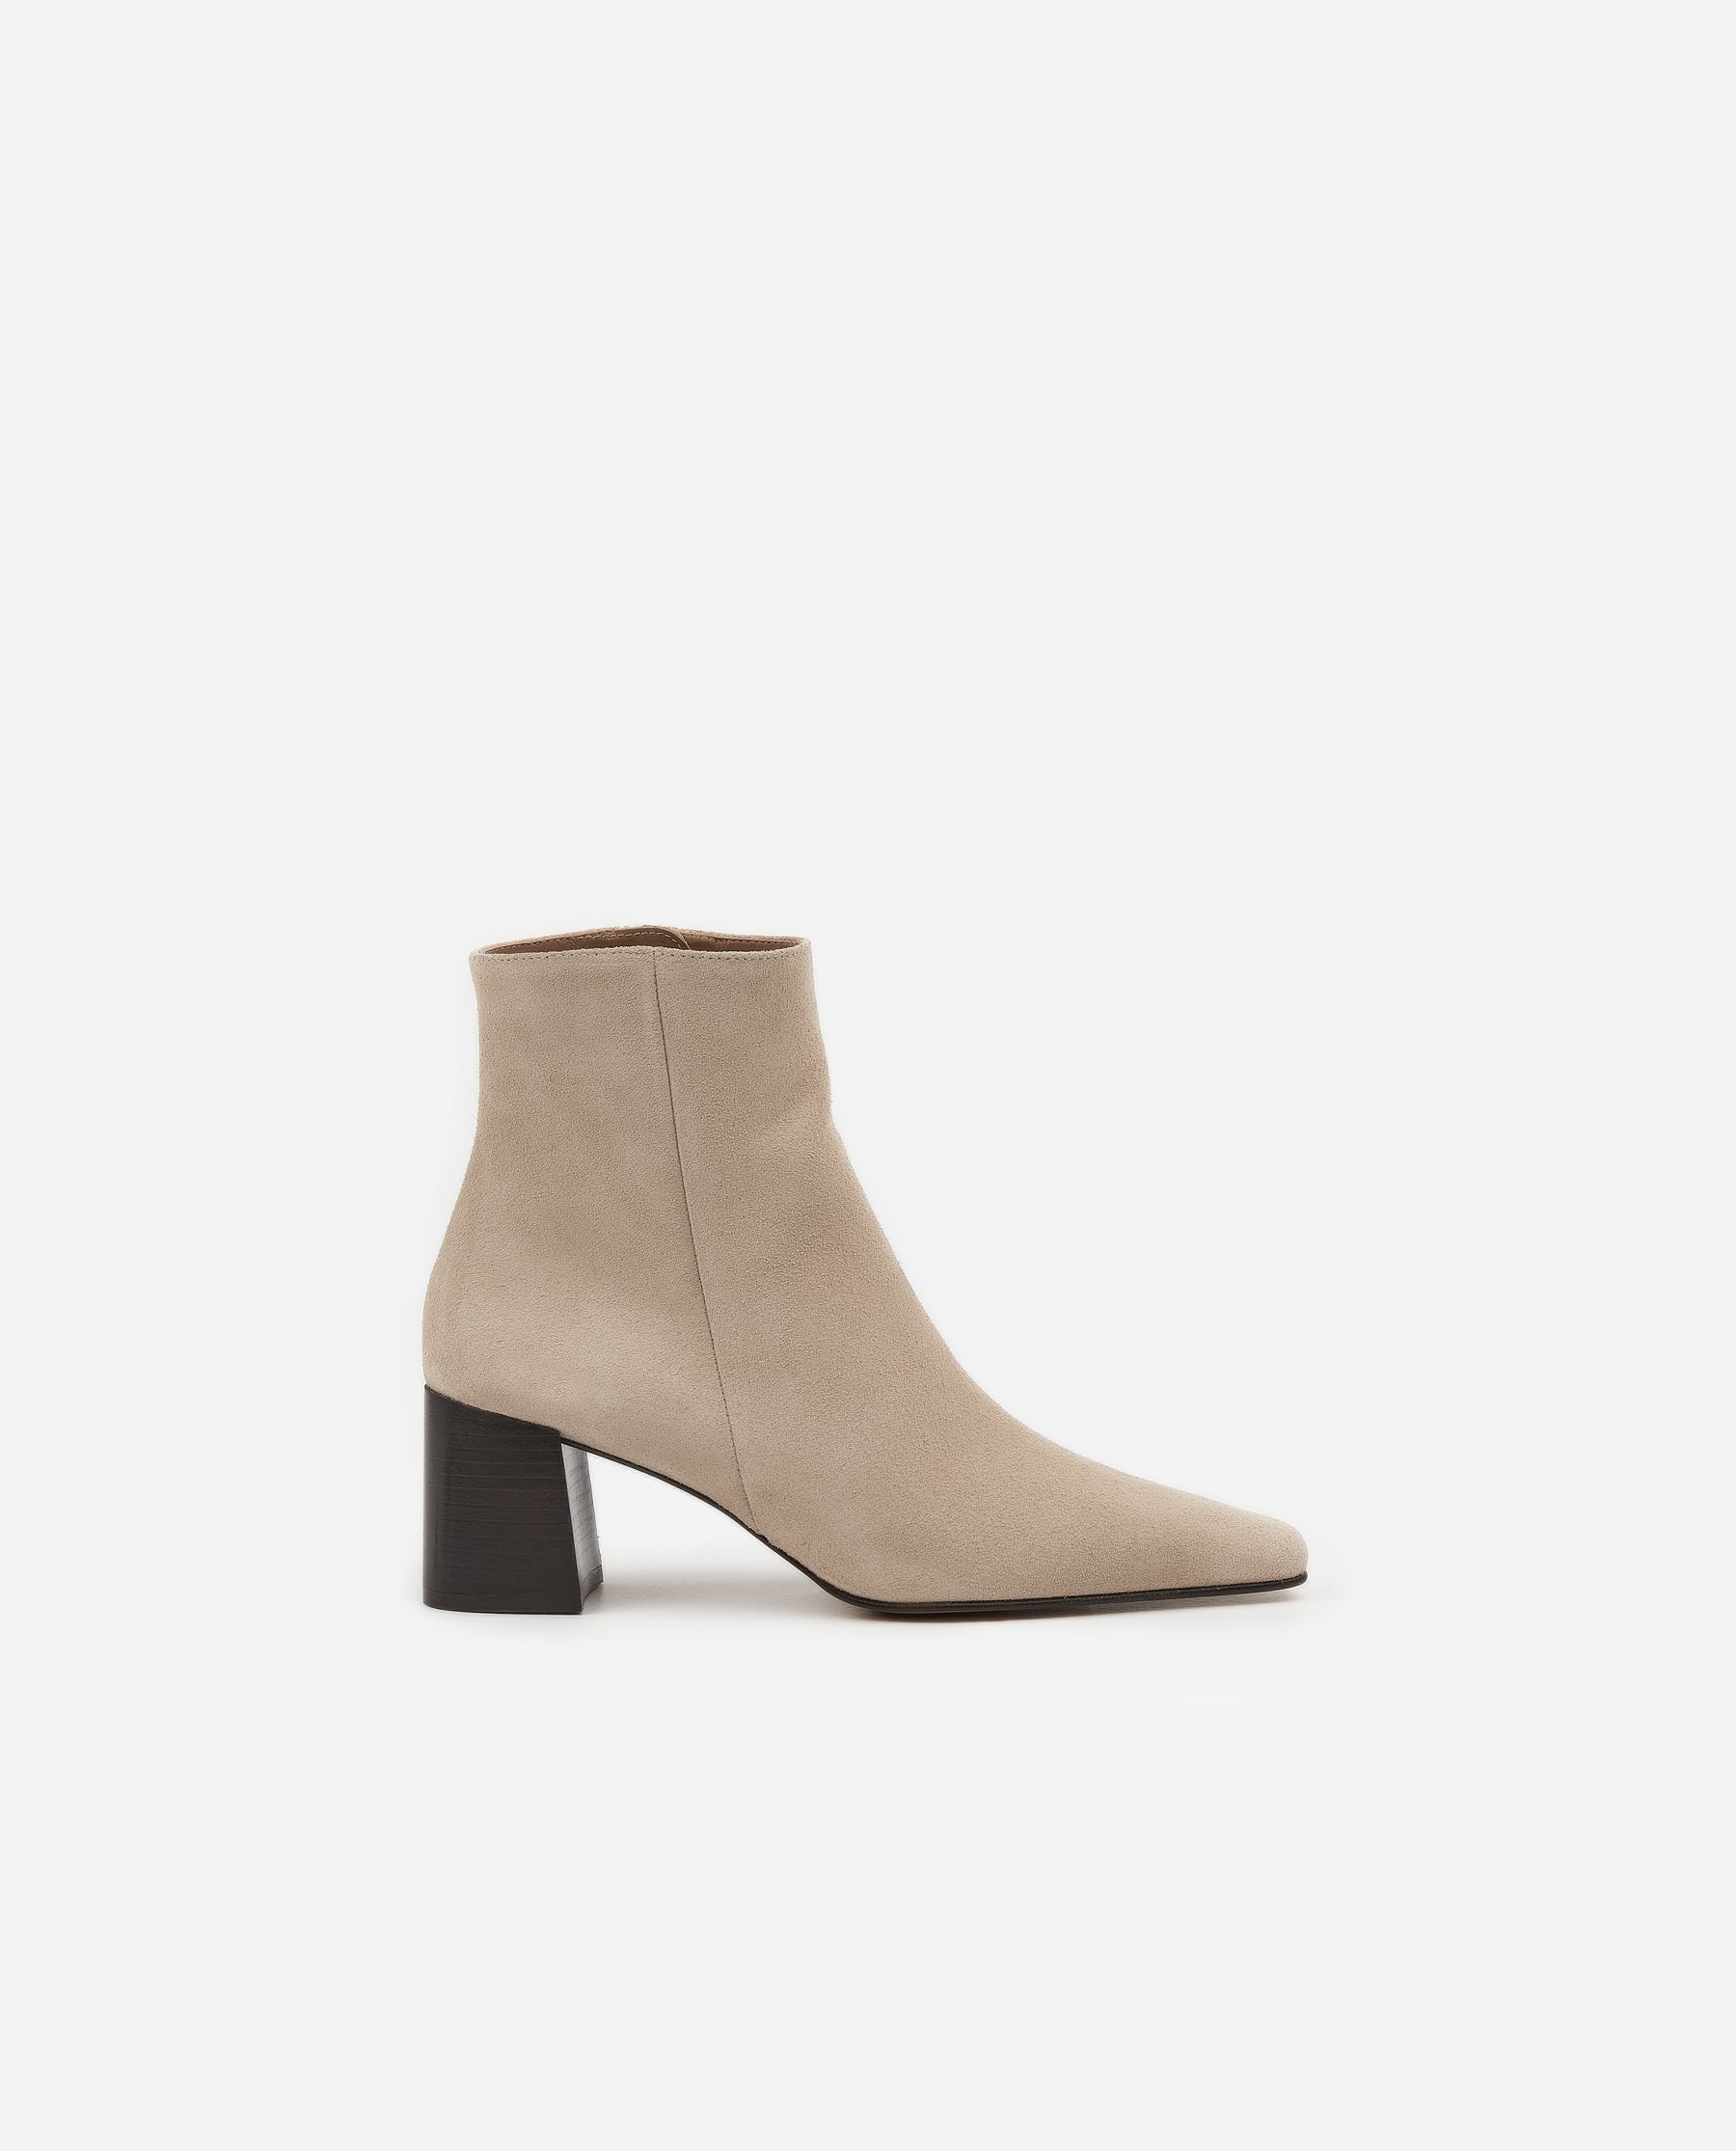 Riley Suede Sand-Schuhe-Flattered-OUTLET-5-Sand suede-ARCHIVIST-ARCHIVE-SALE